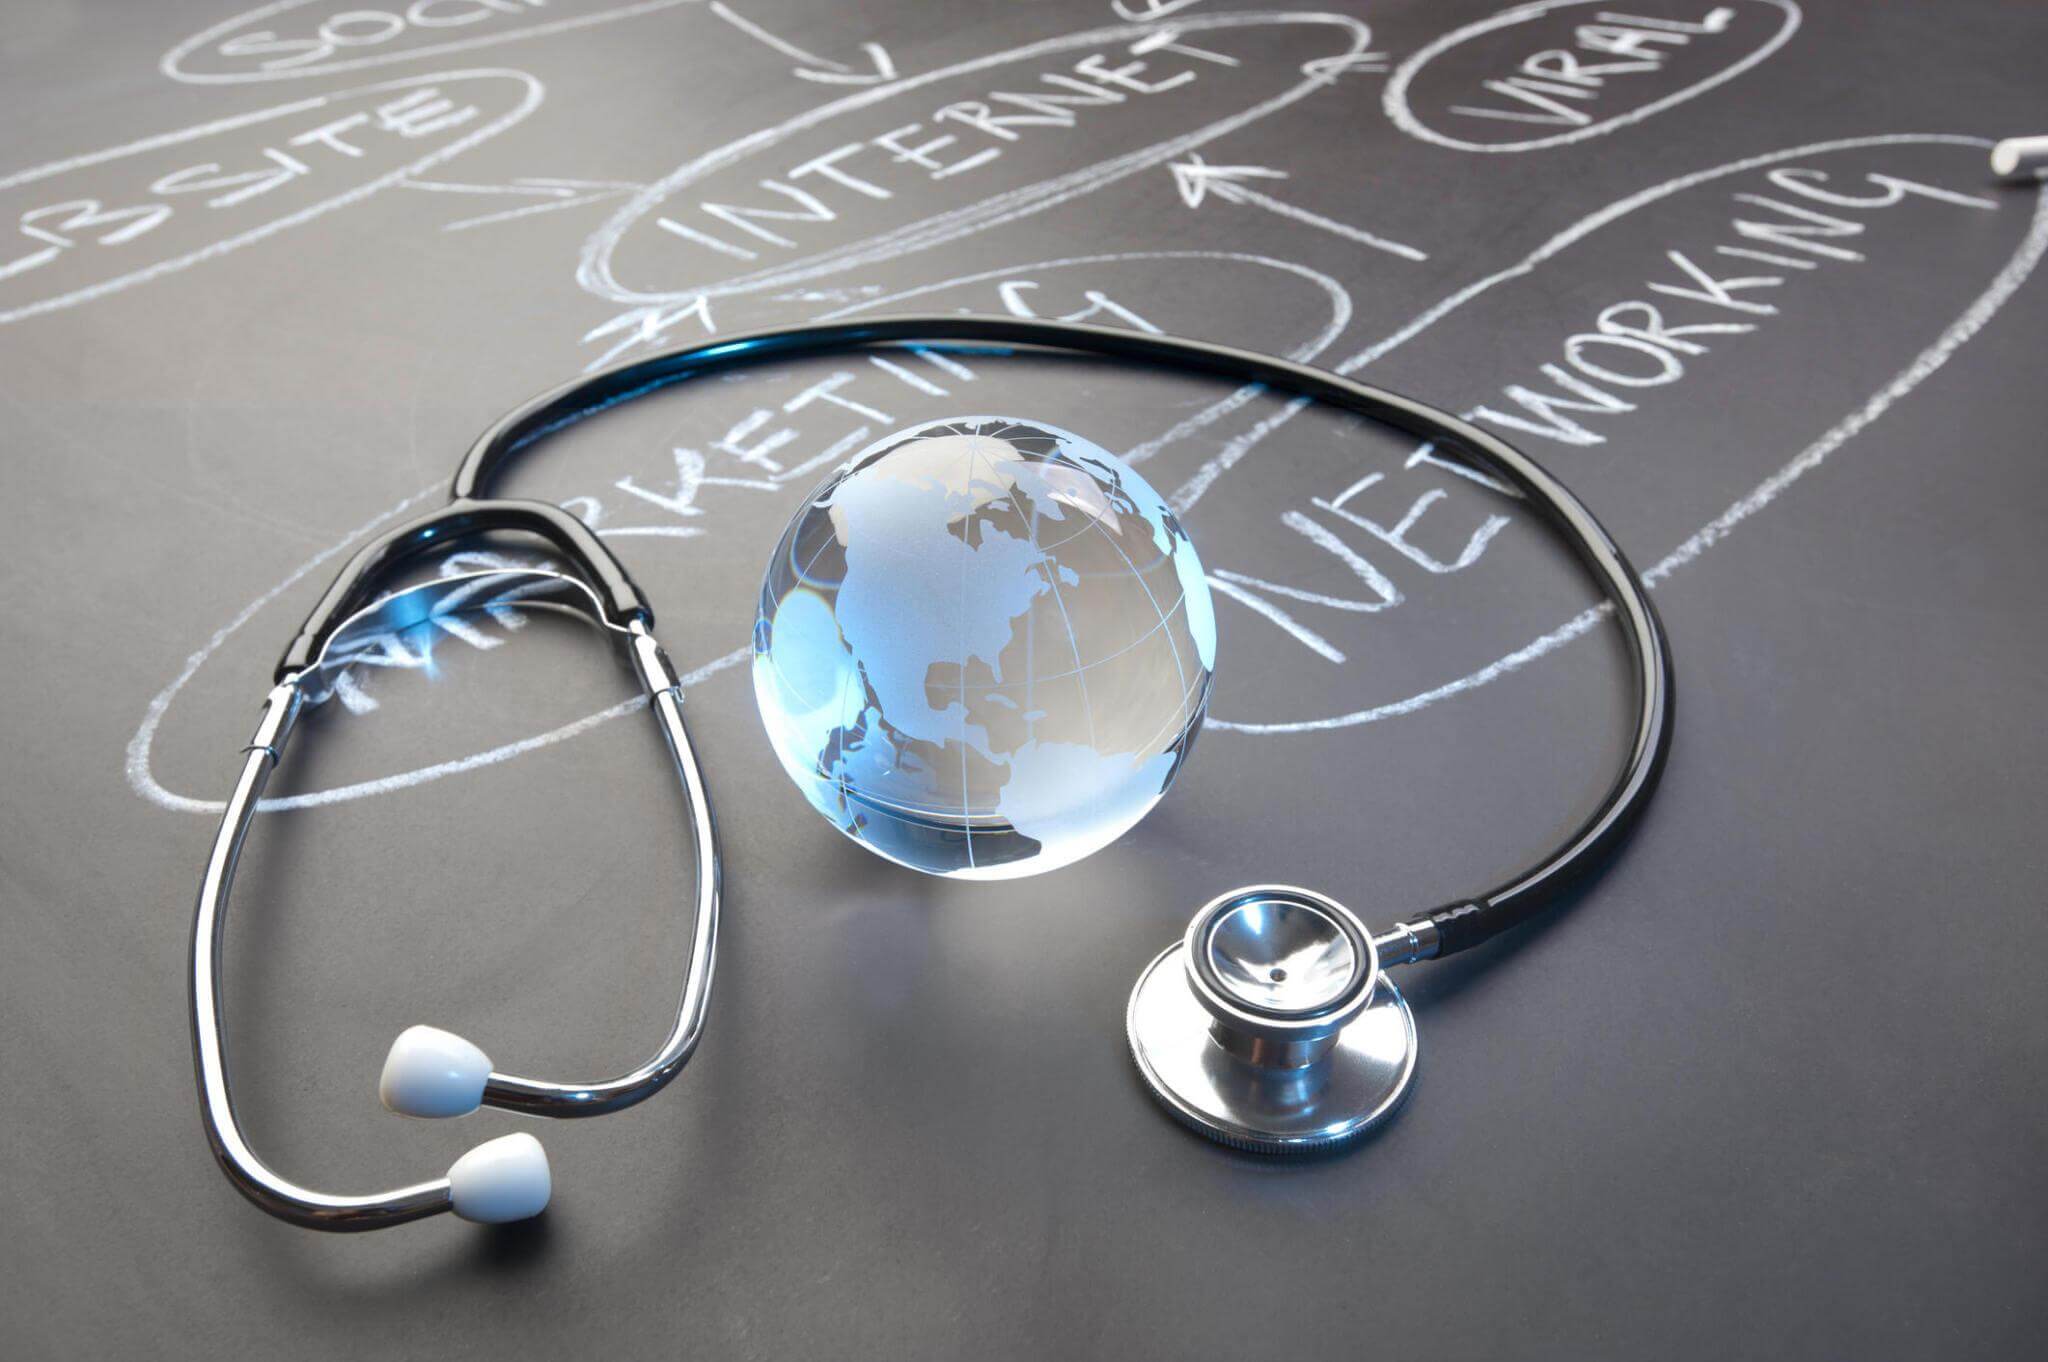 Stethoscope, globe, healthcare and technology concepts on chalkboard.